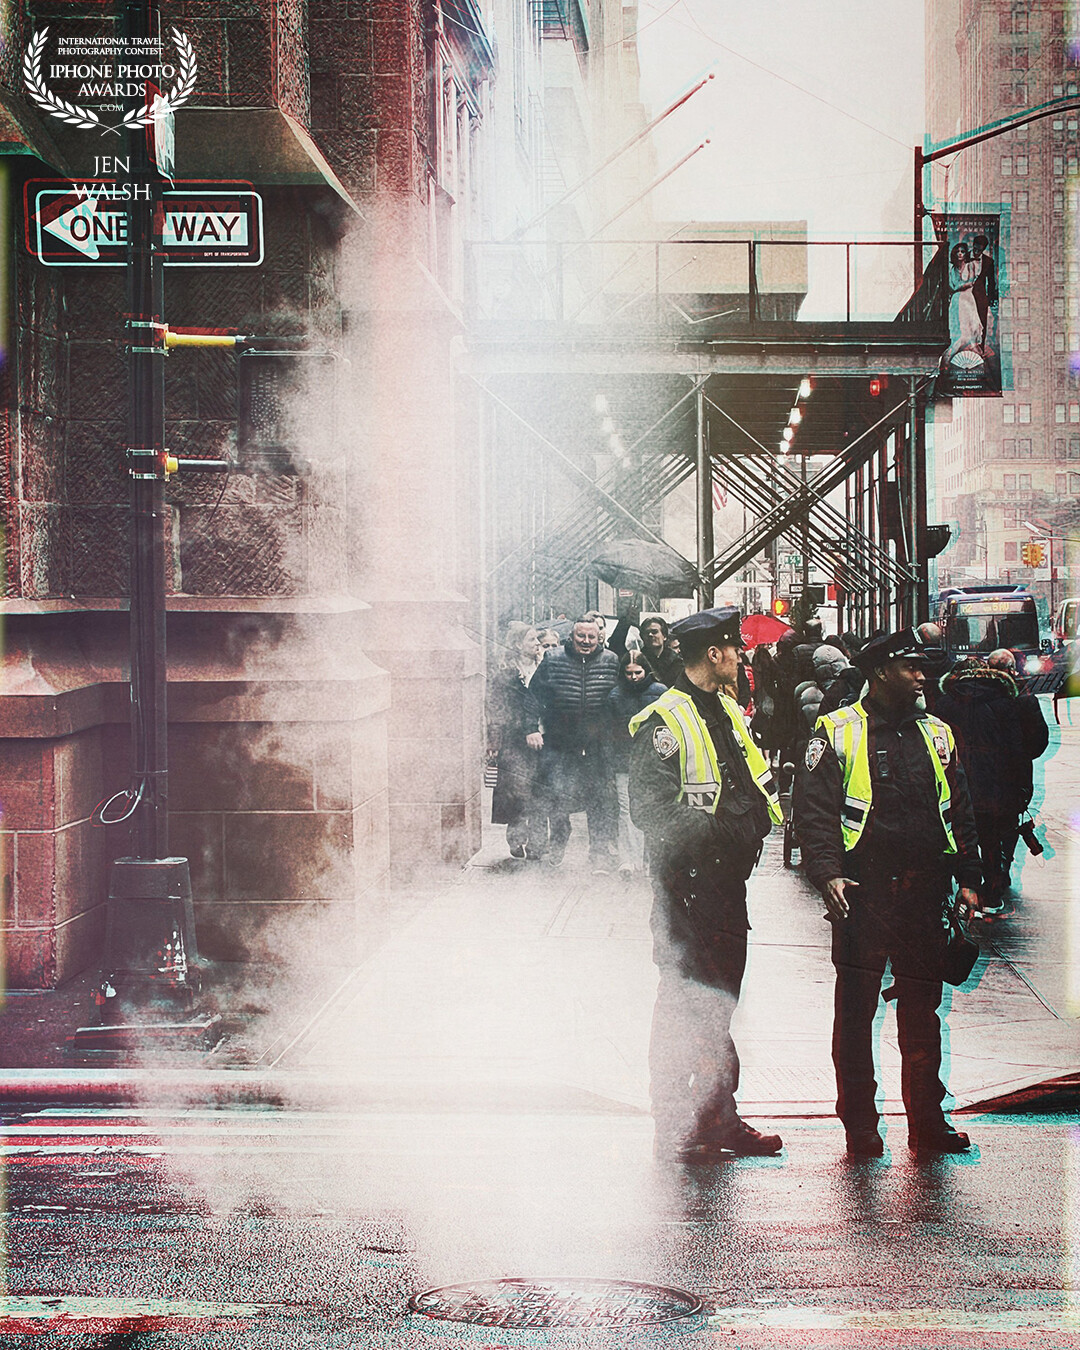 It was a misty New Year’s Eve morning in New York City and steam came from every manhole. These were just two of the thousand of officers who kept Manhattan safe in anticipation of the ball drop that evening.